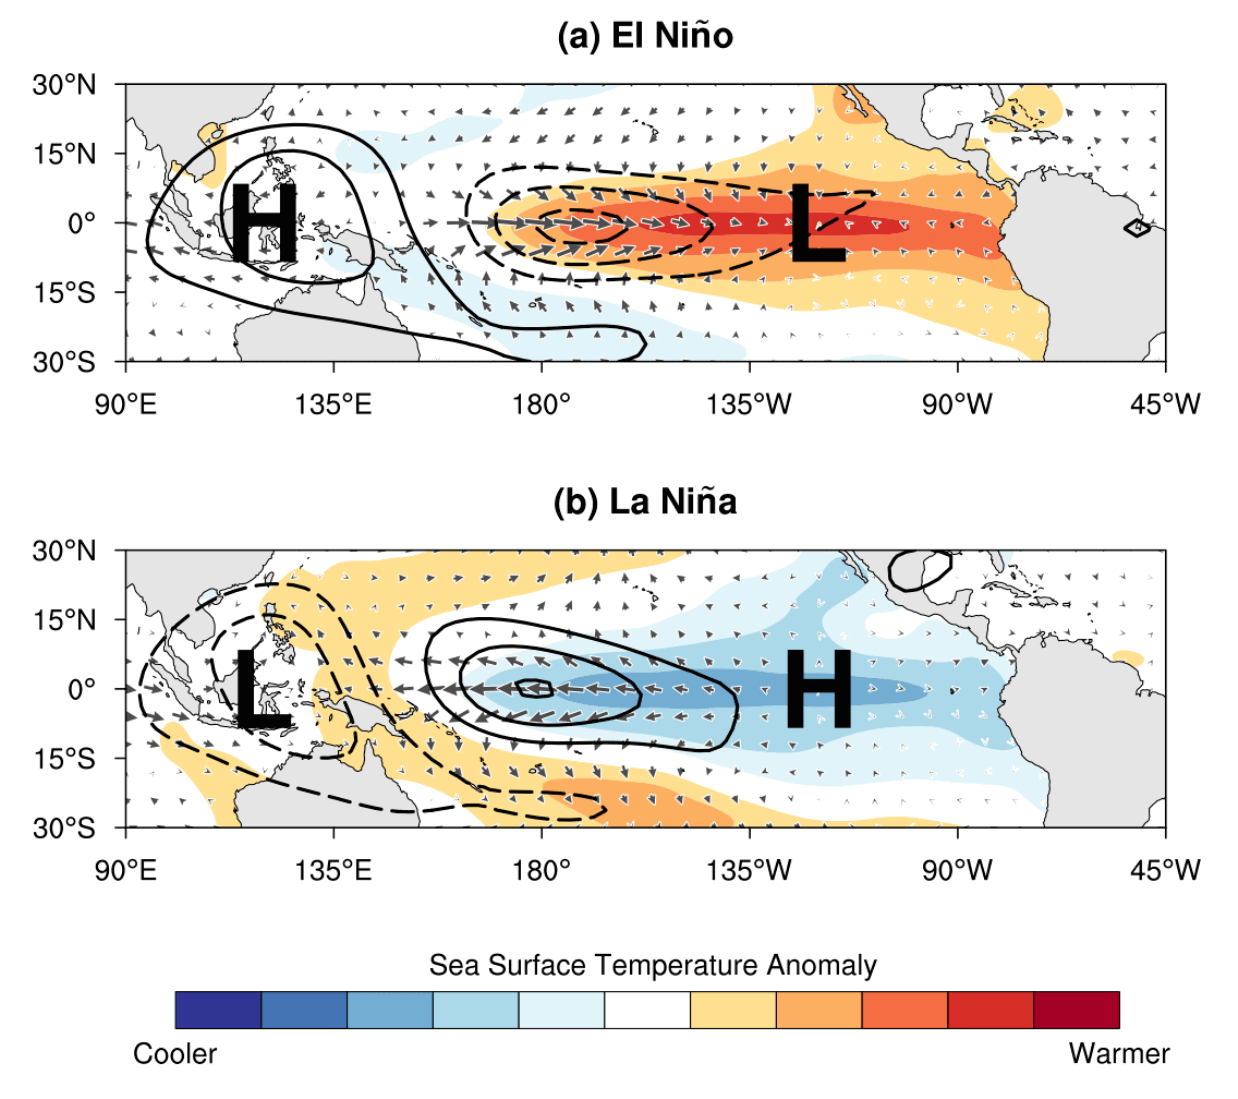 enso-el-nino-winter-season-2023-temperature-pressure-anomaly-cold-atmospheric-weather-pattern-forecast